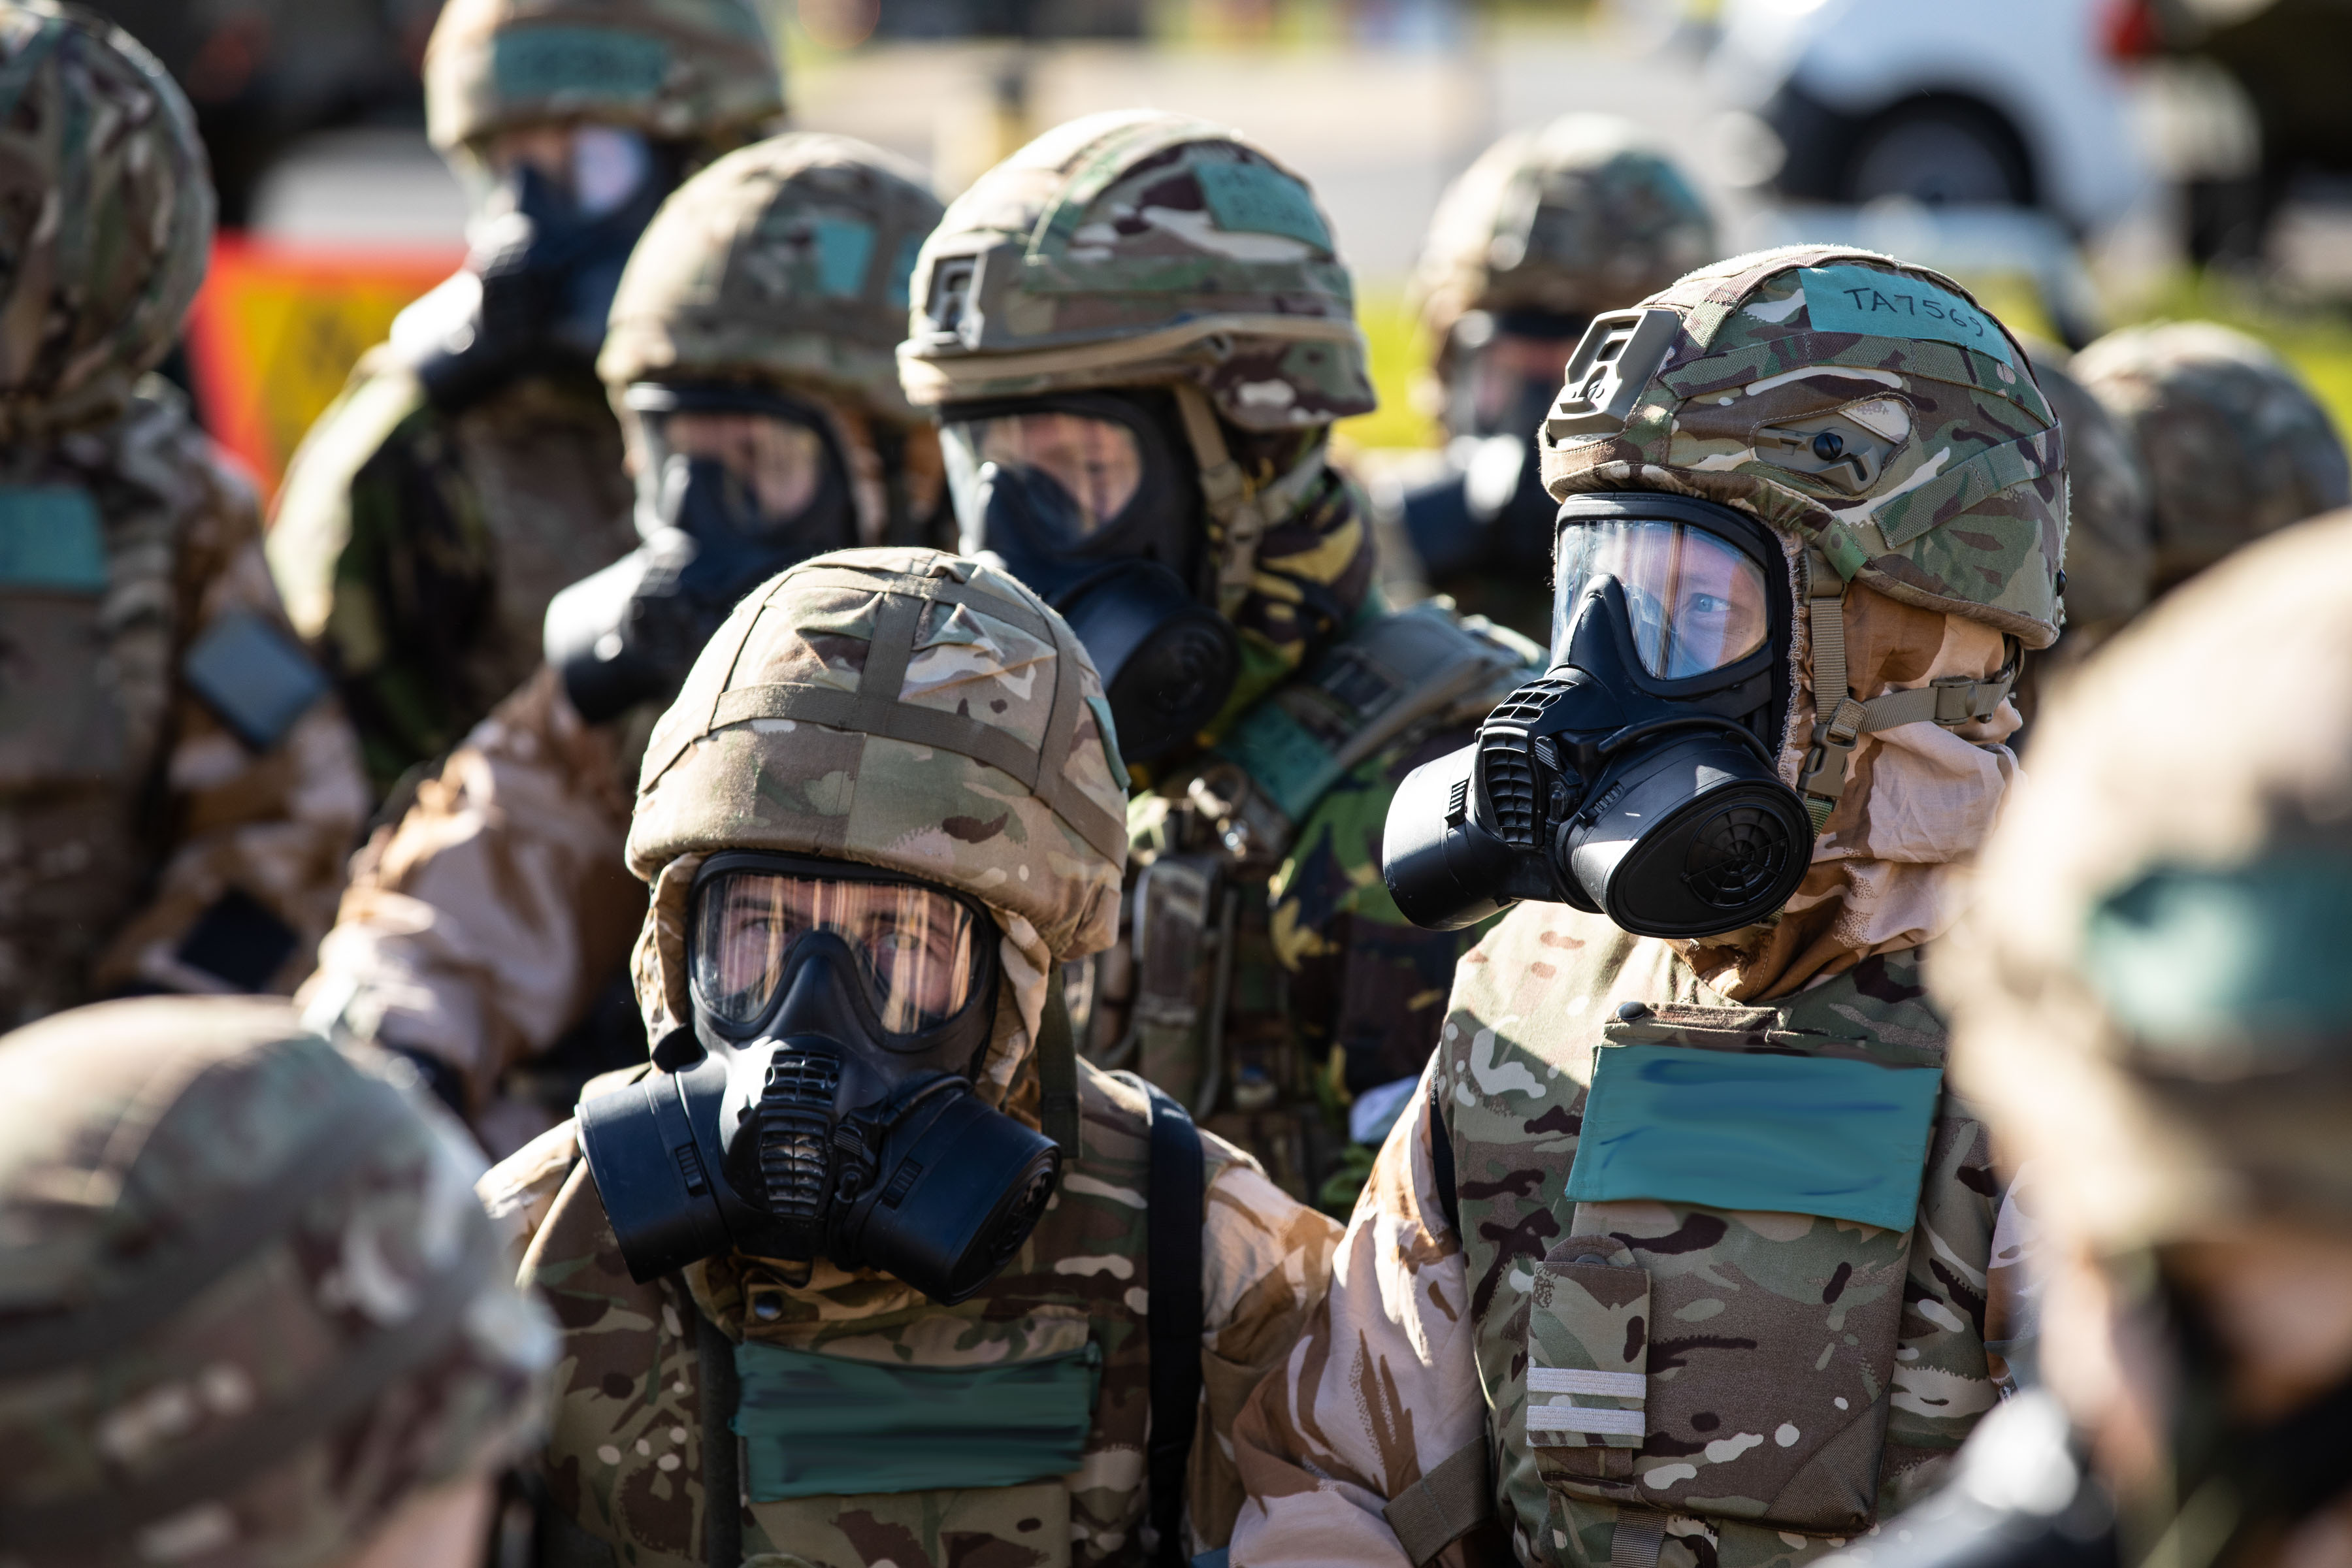 RAF personnel in respirators during CAPEVAL